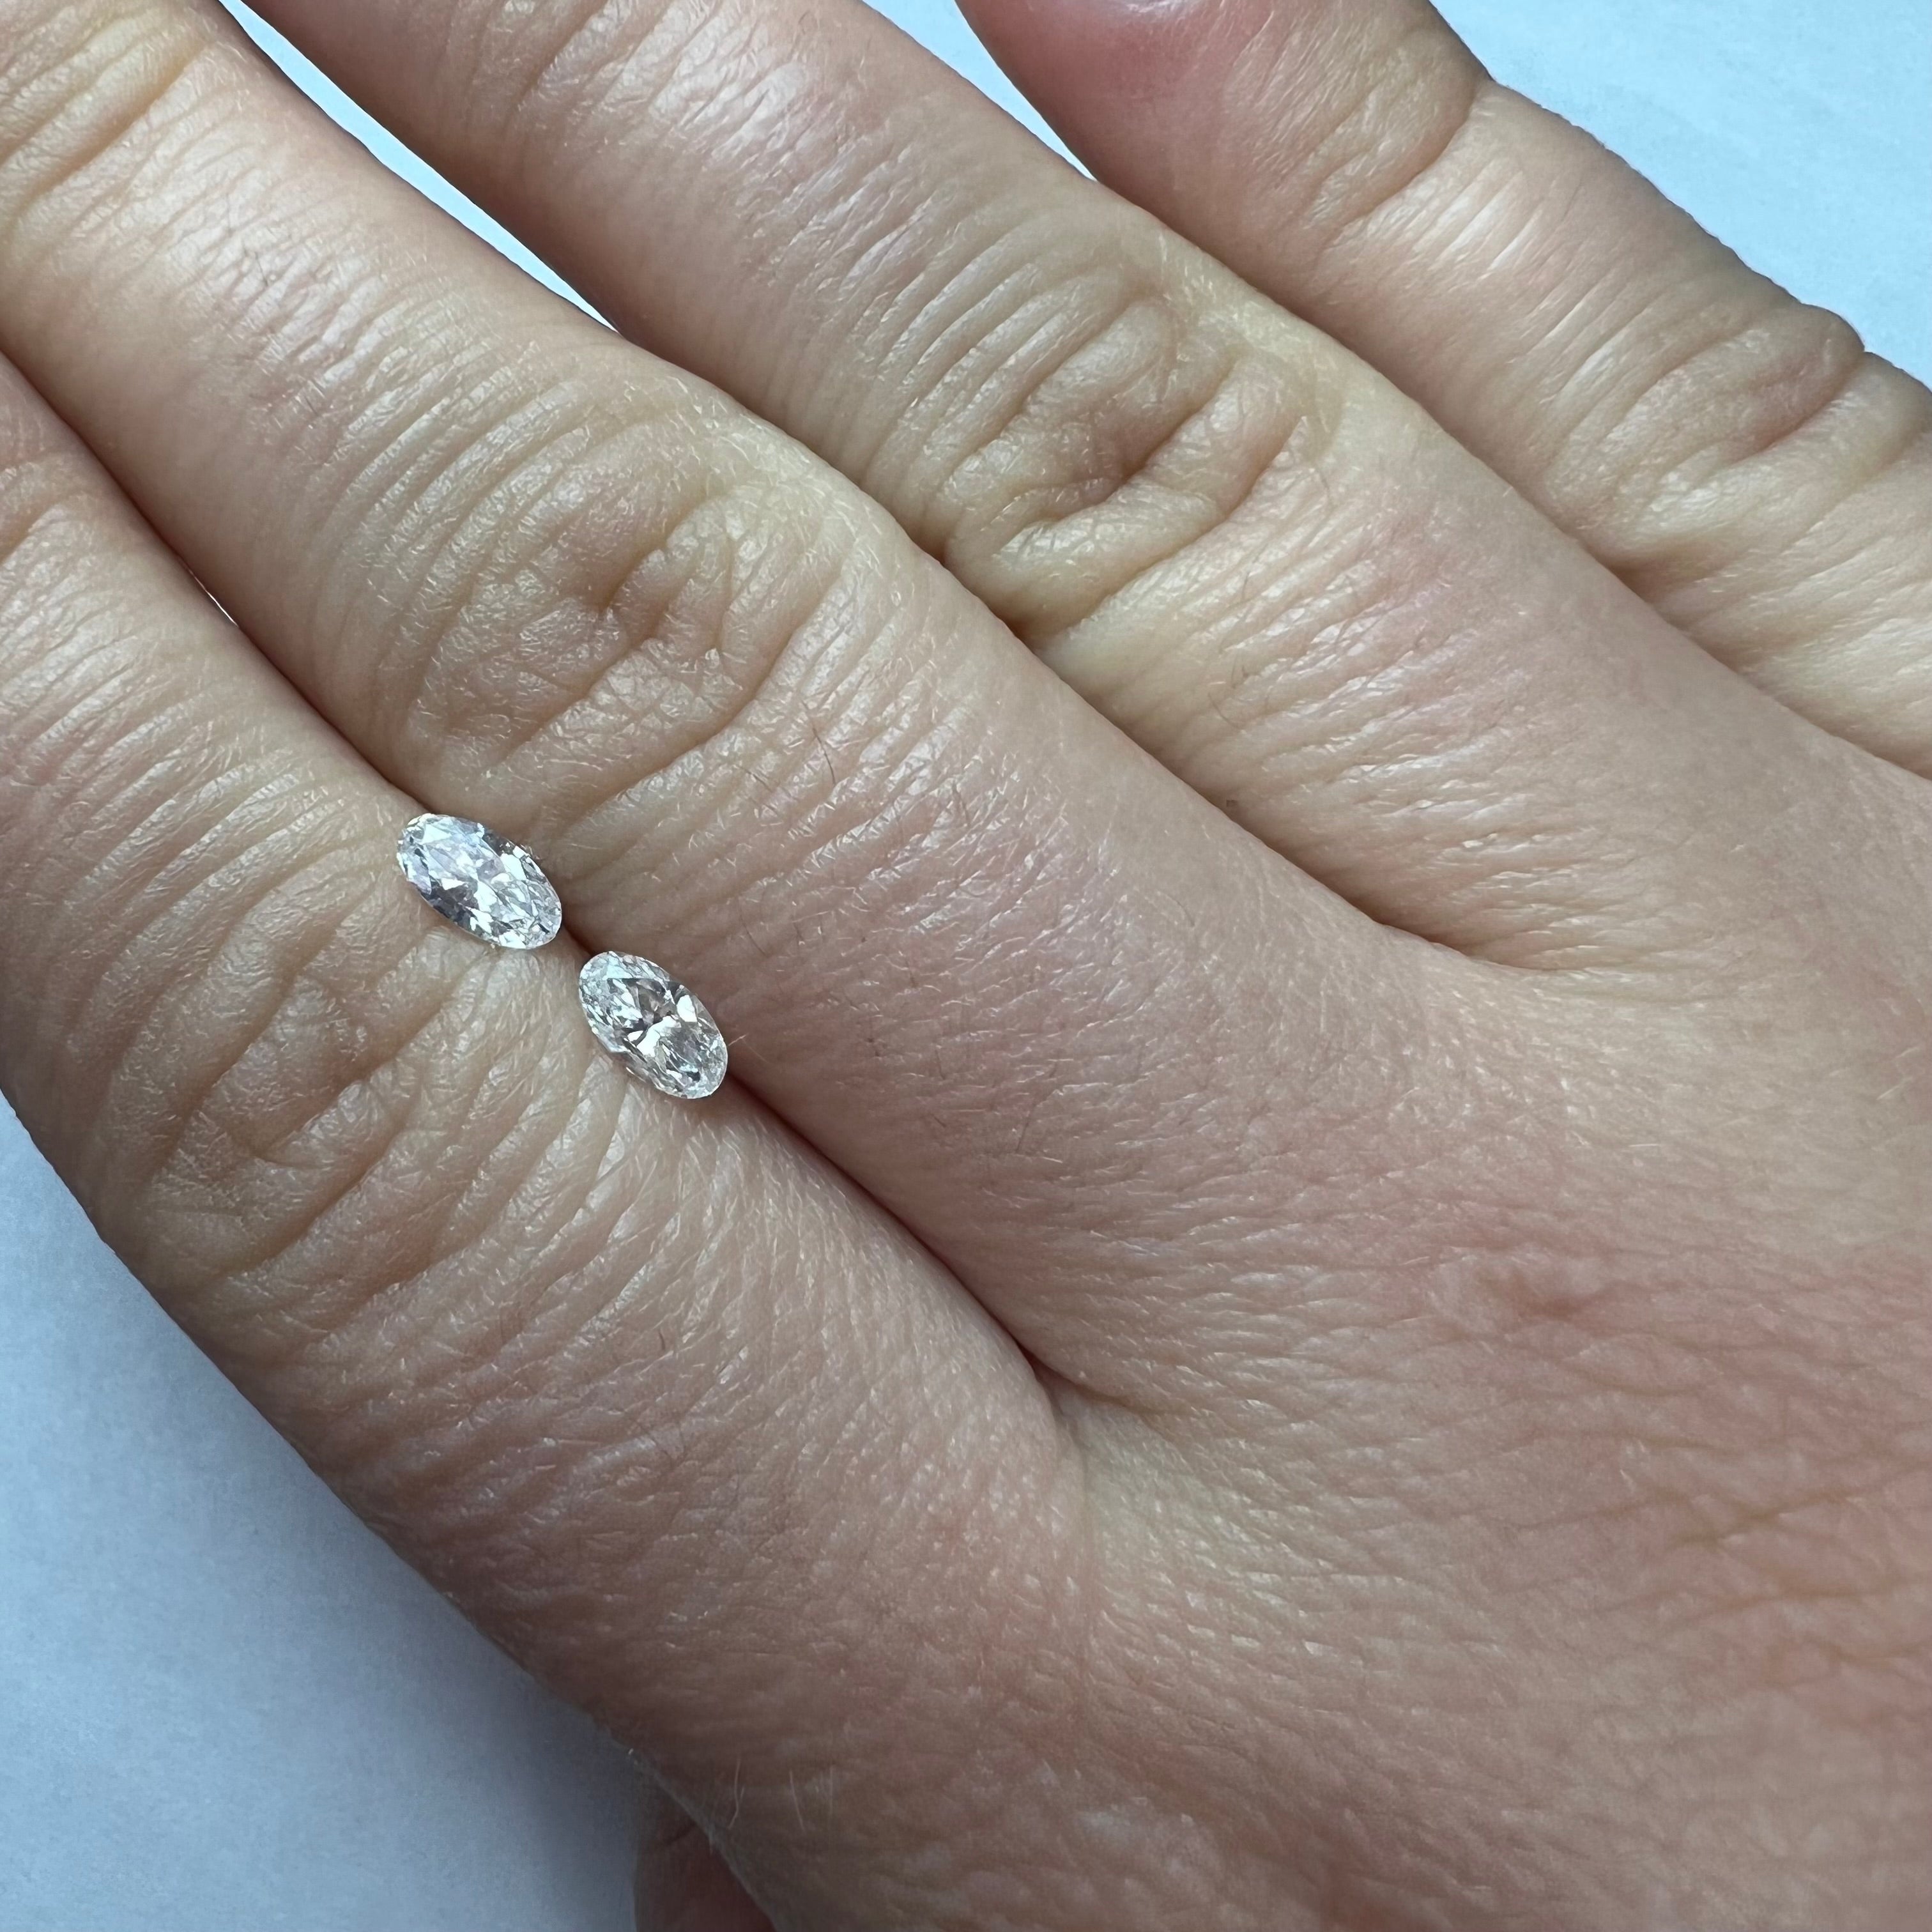 .62ctw Pair of Oval Cut Diamonds VS2 H-J Natural and Earth mined